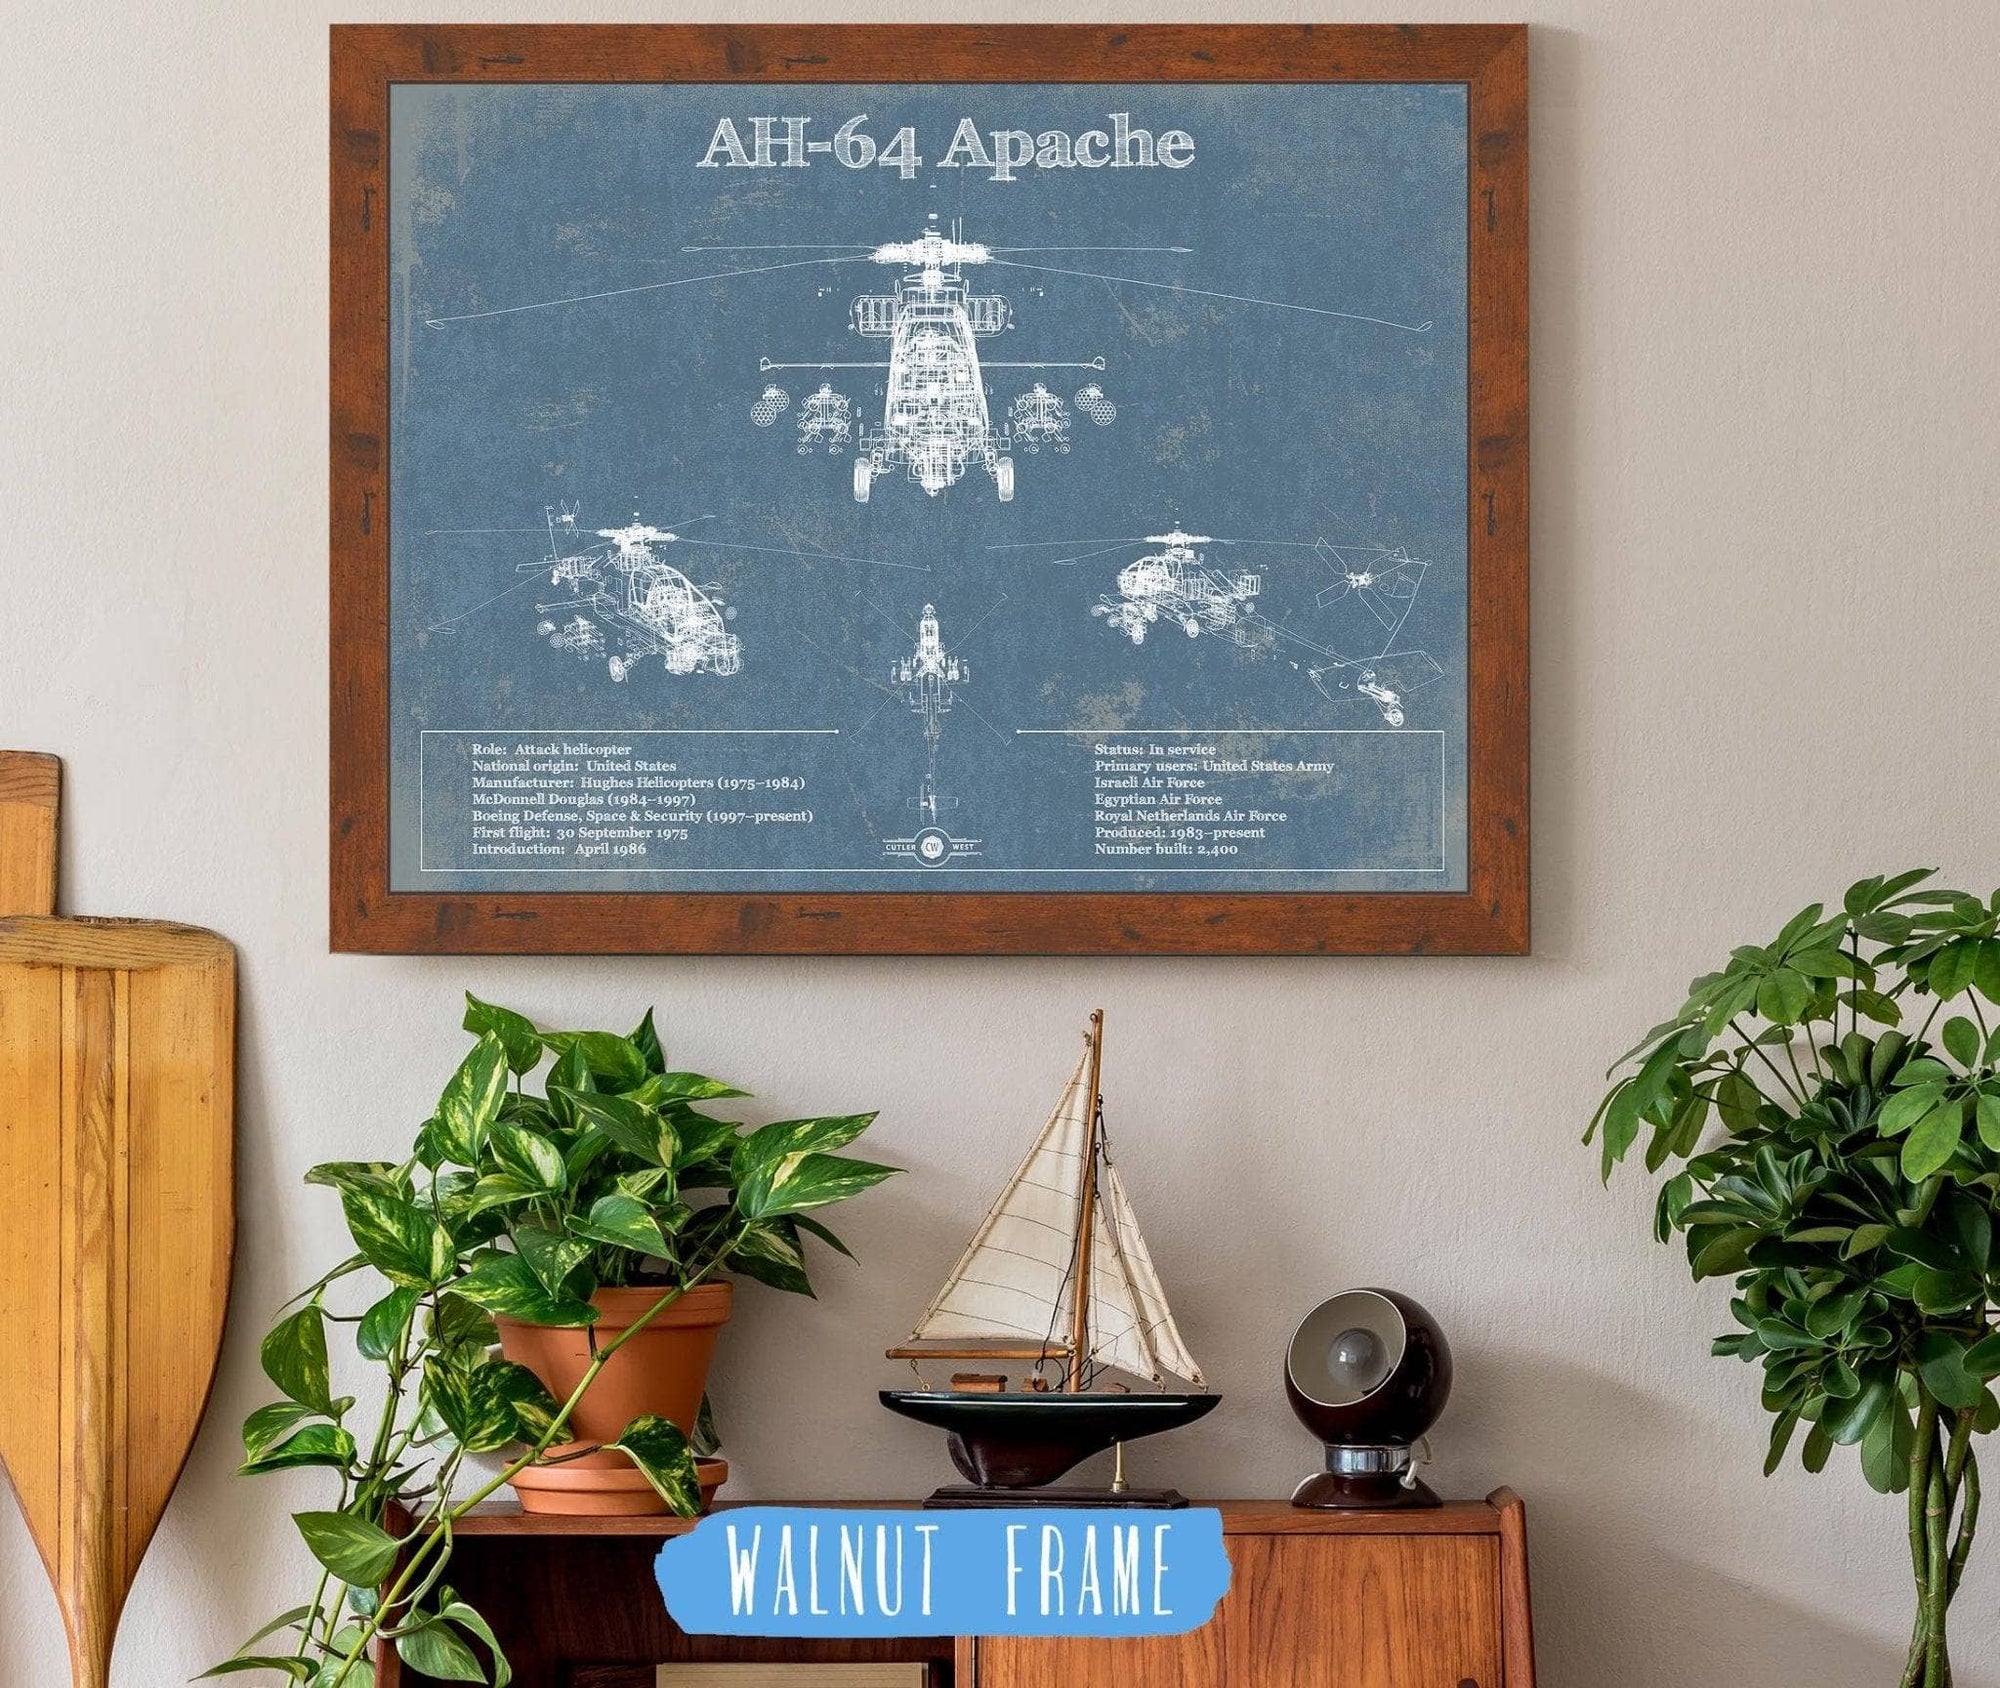 Cutler West Best Selling Collection 14" x 11" / Walnut Frame AH-64 Apache Helicopter Vintage Aviation Blueprint Military Print 797415875-TOP